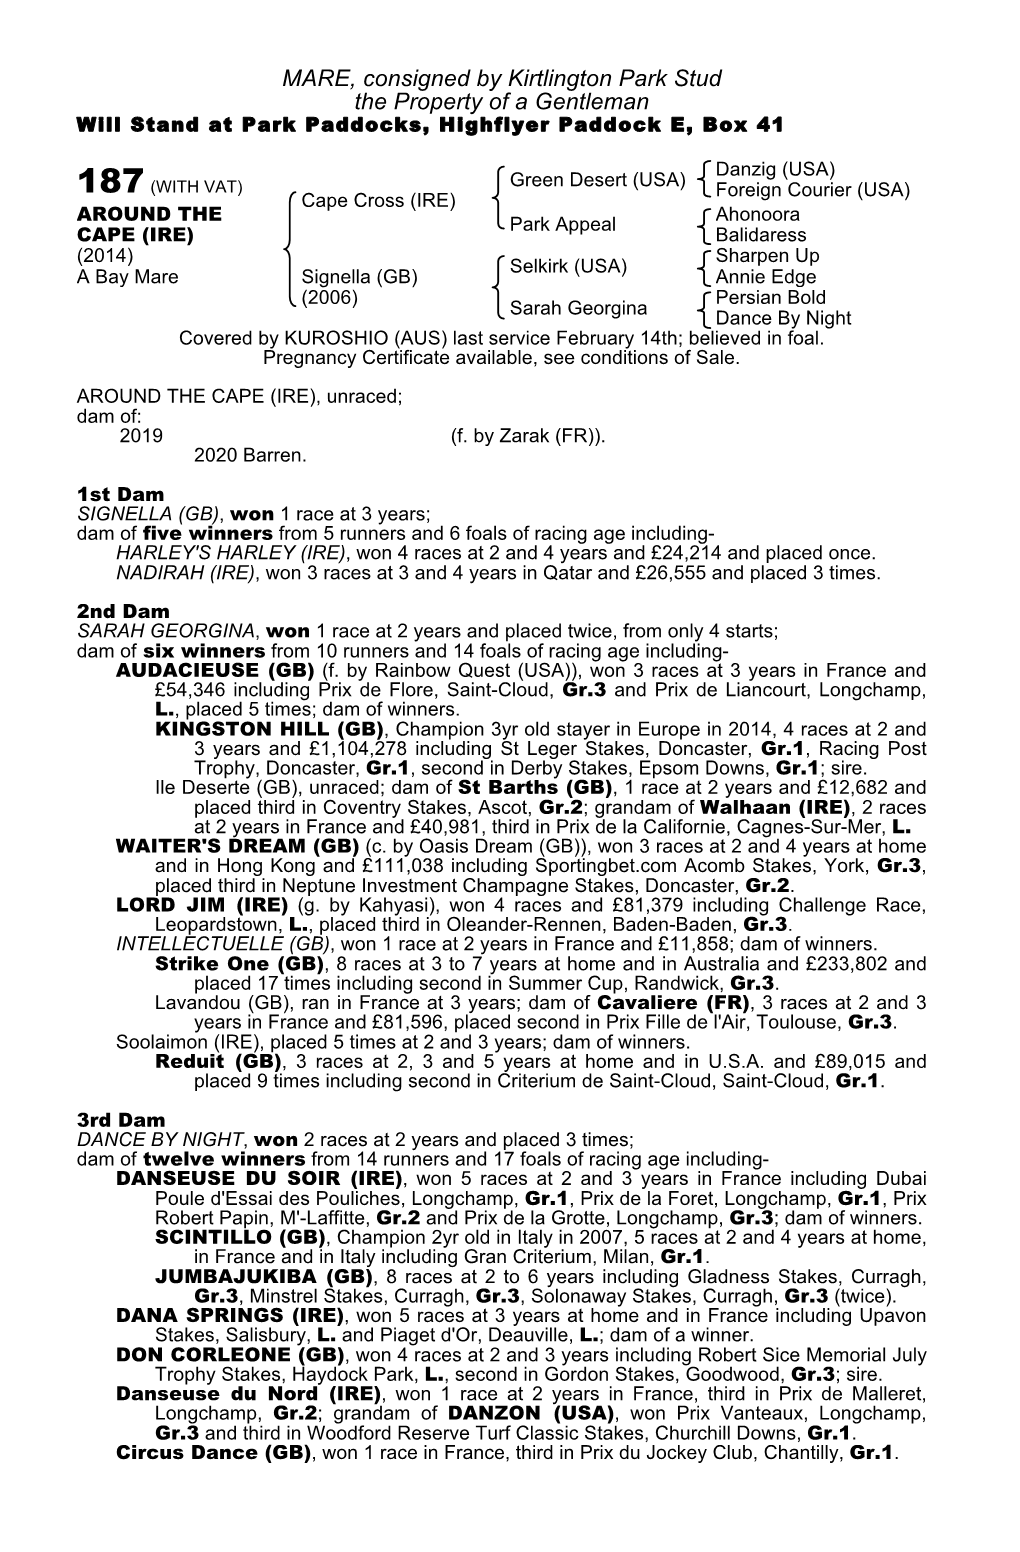 MARE, Consigned by Kirtlington Park Stud the Property of a Gentleman Will Stand at Park Paddocks, Highflyer Paddock E, Box 41